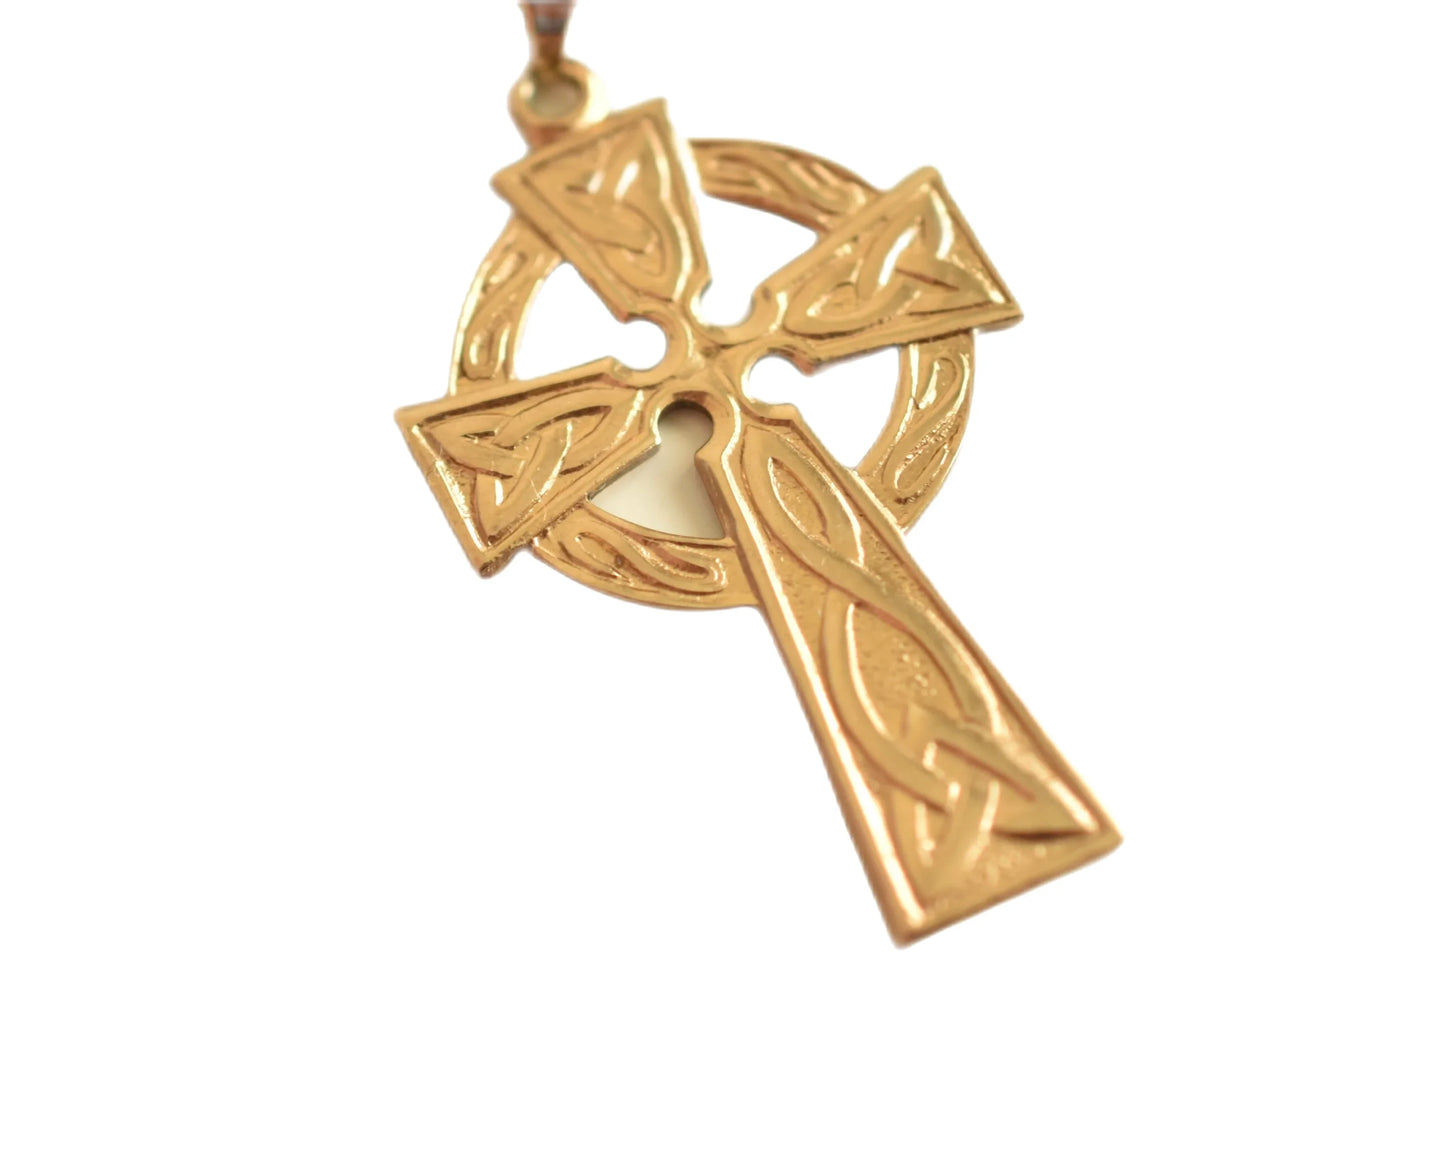 SOLD OUT - 9ct Gold Iona Cross Celtic Pendant Necklace